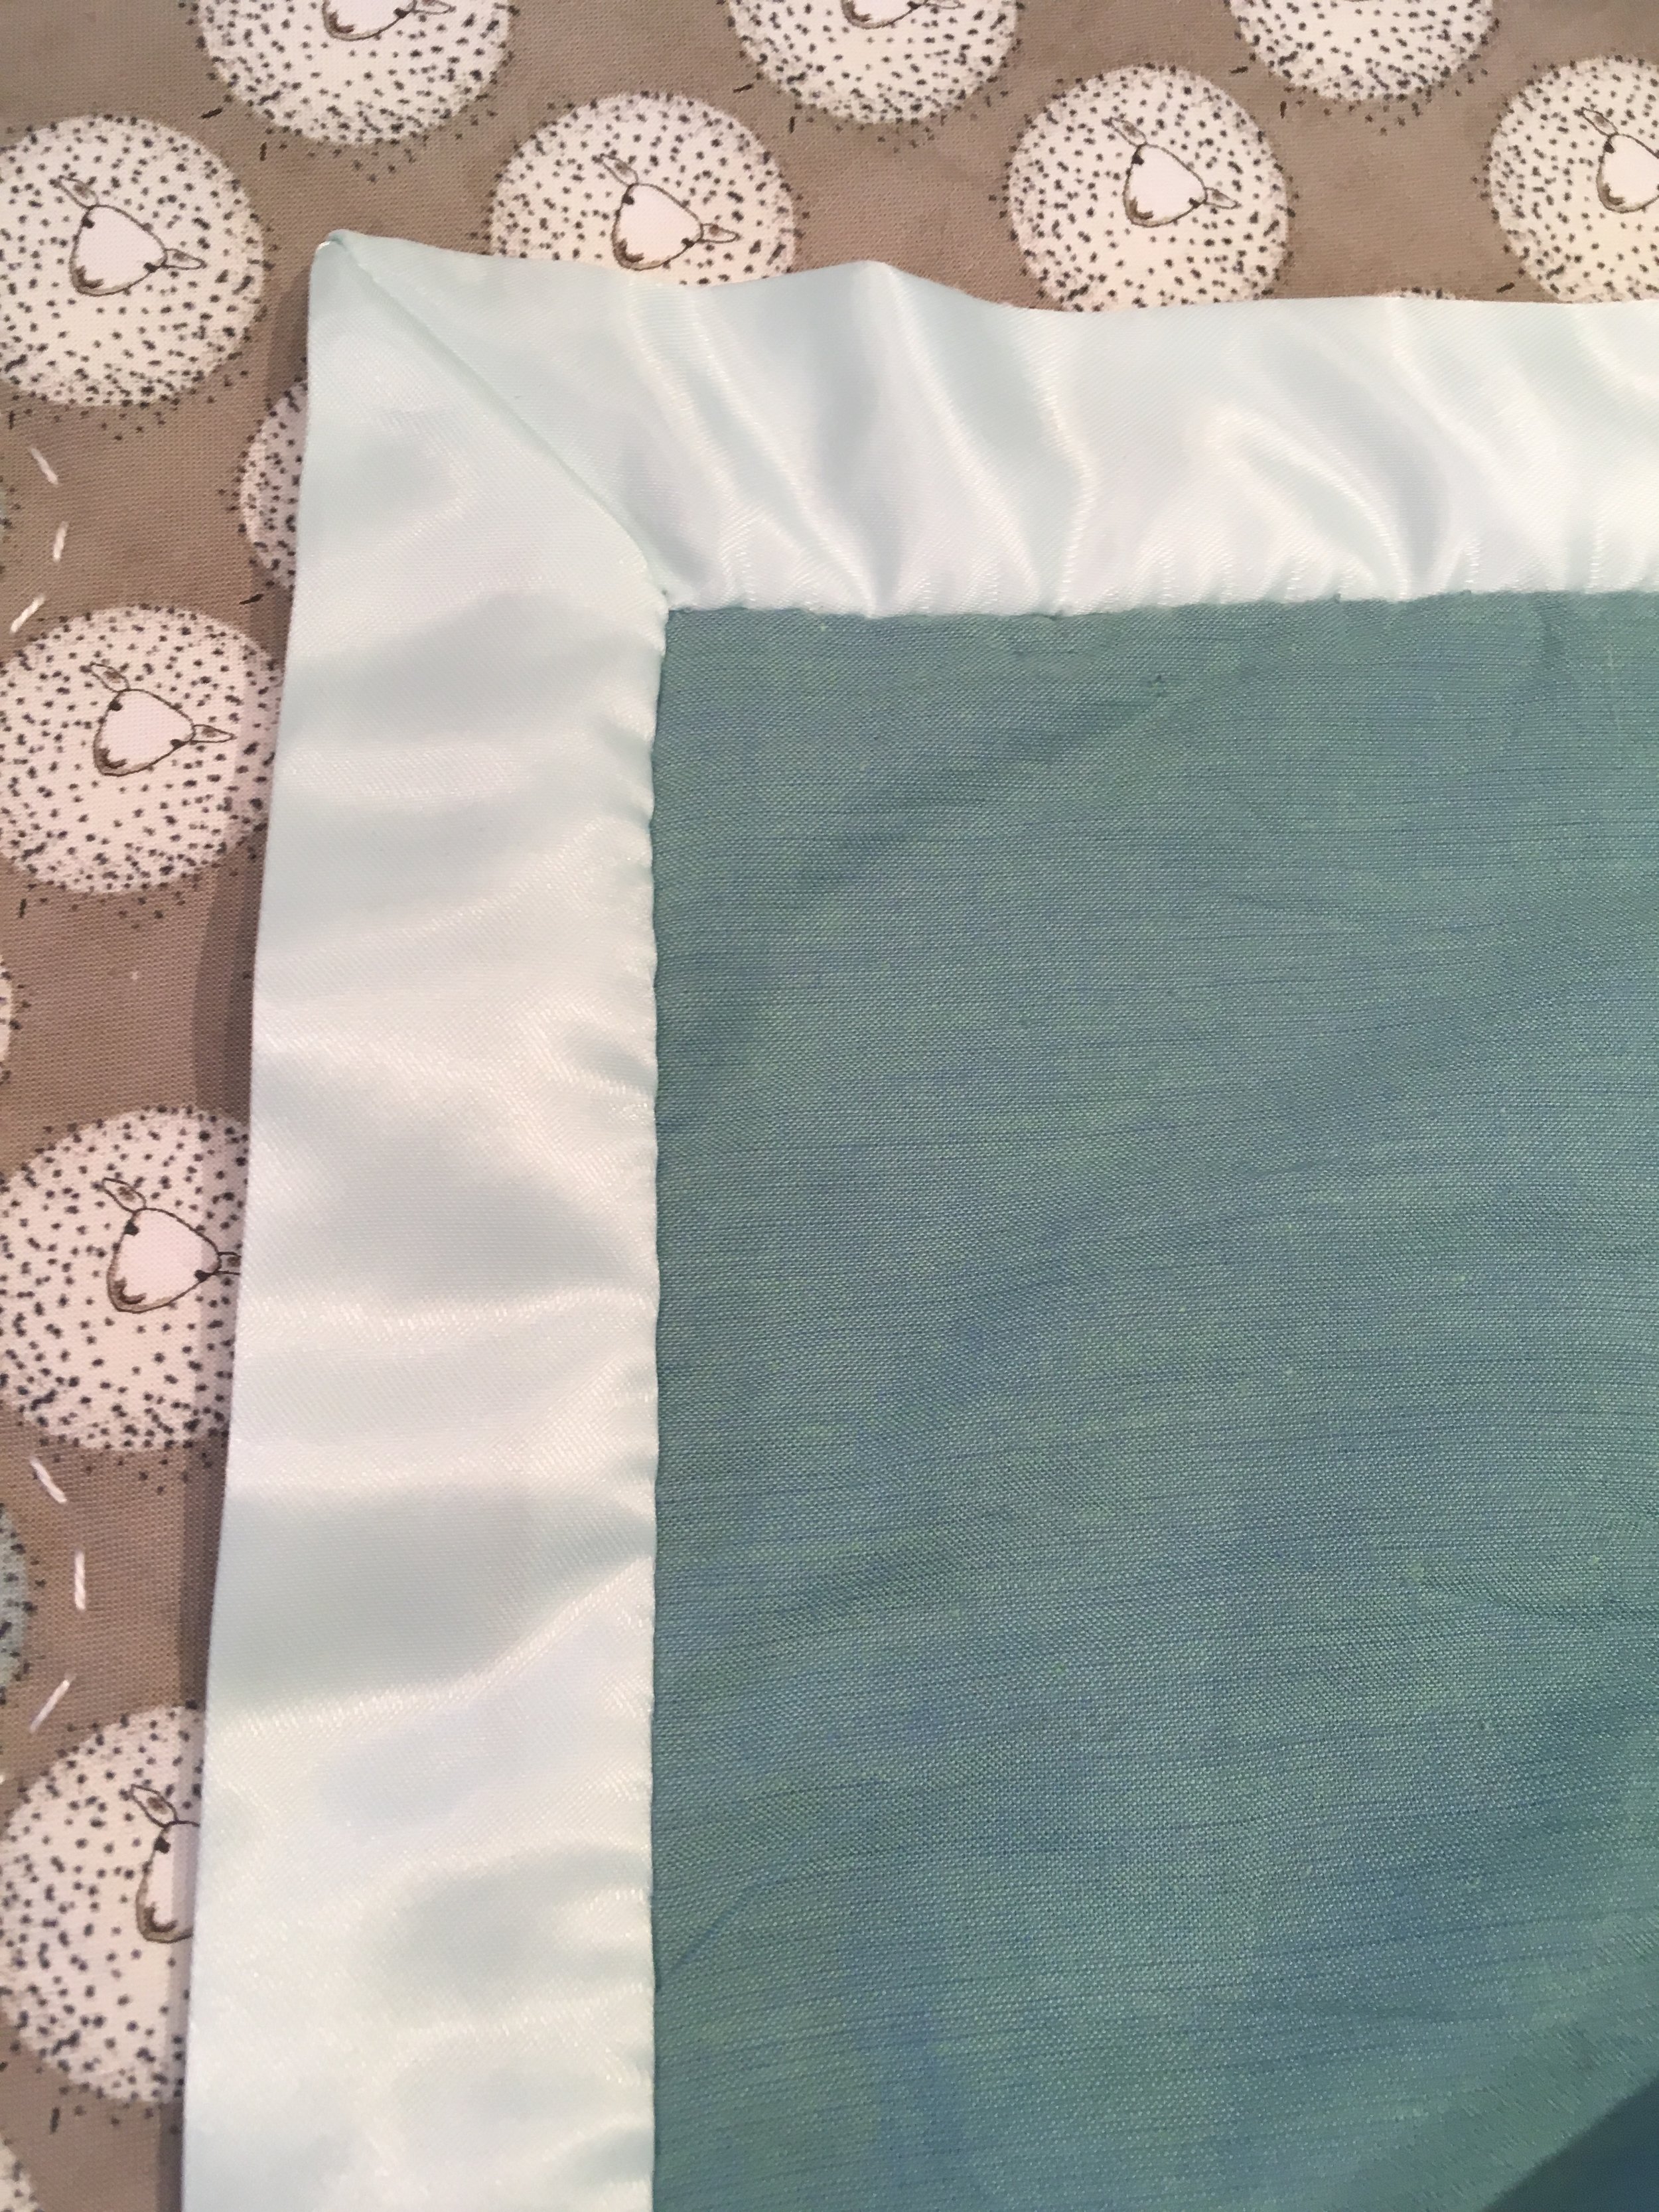 How to Sew/Apply/Attach Baby Blanket Binding - Blanket Binding